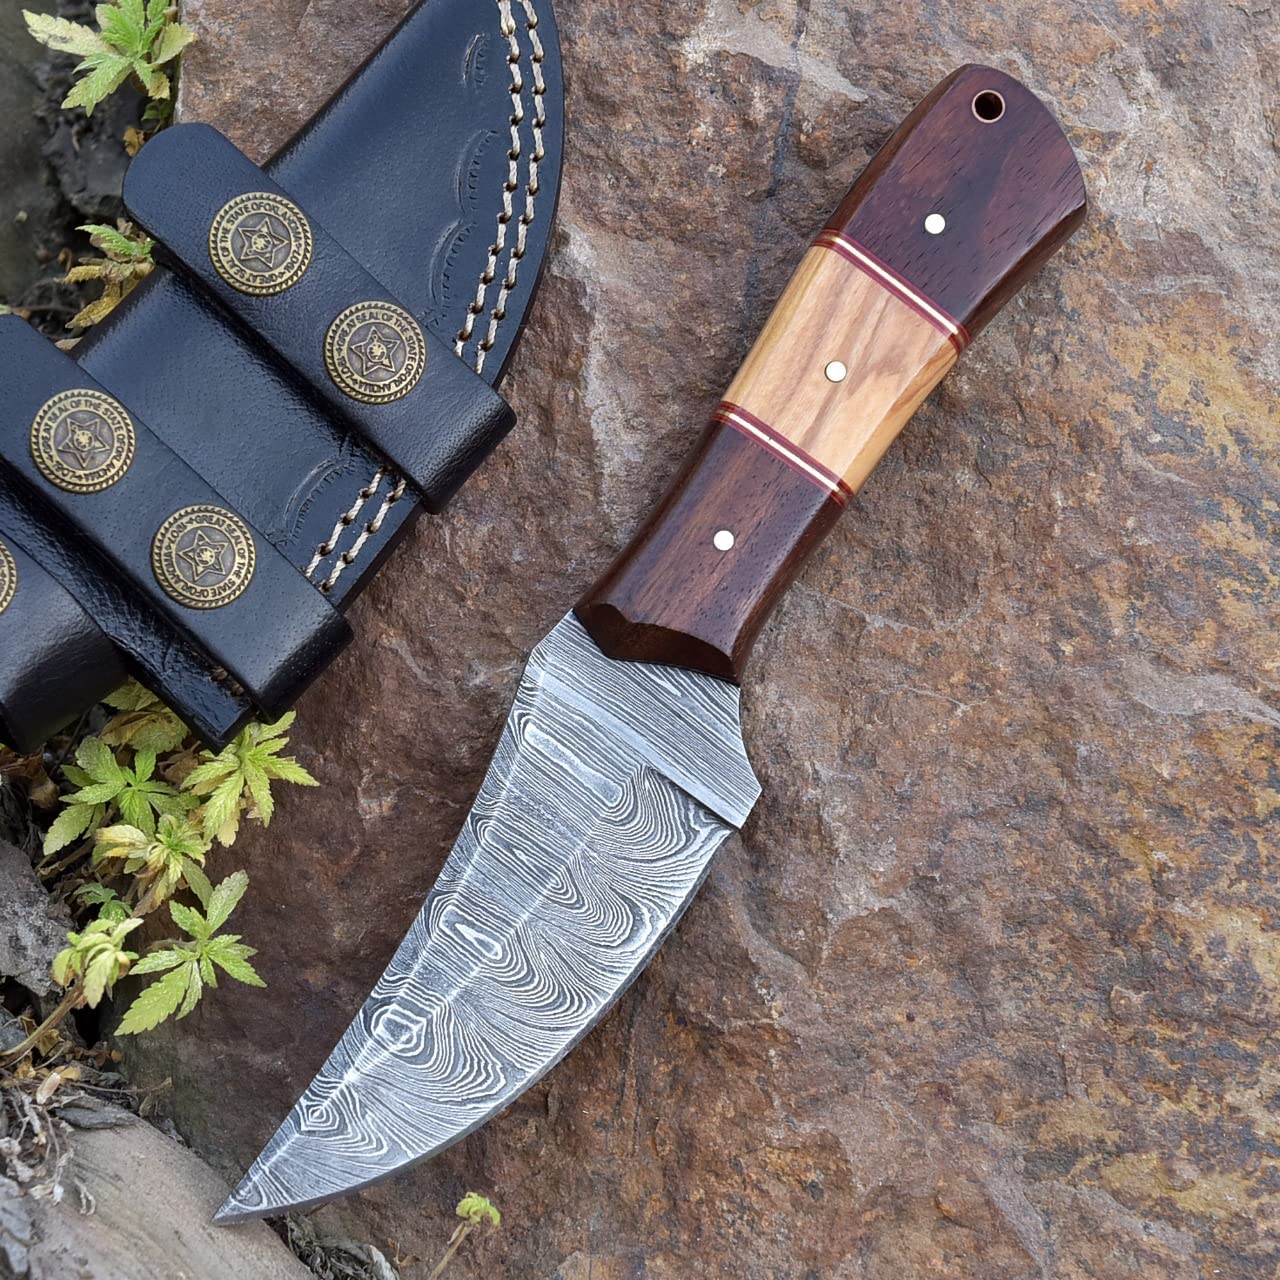 Grace Knives Handmade Damascus Steel Hunting Knife 8 Inches Fix Blade Knife With Leather Sheath G-038 (Wood And Olive)